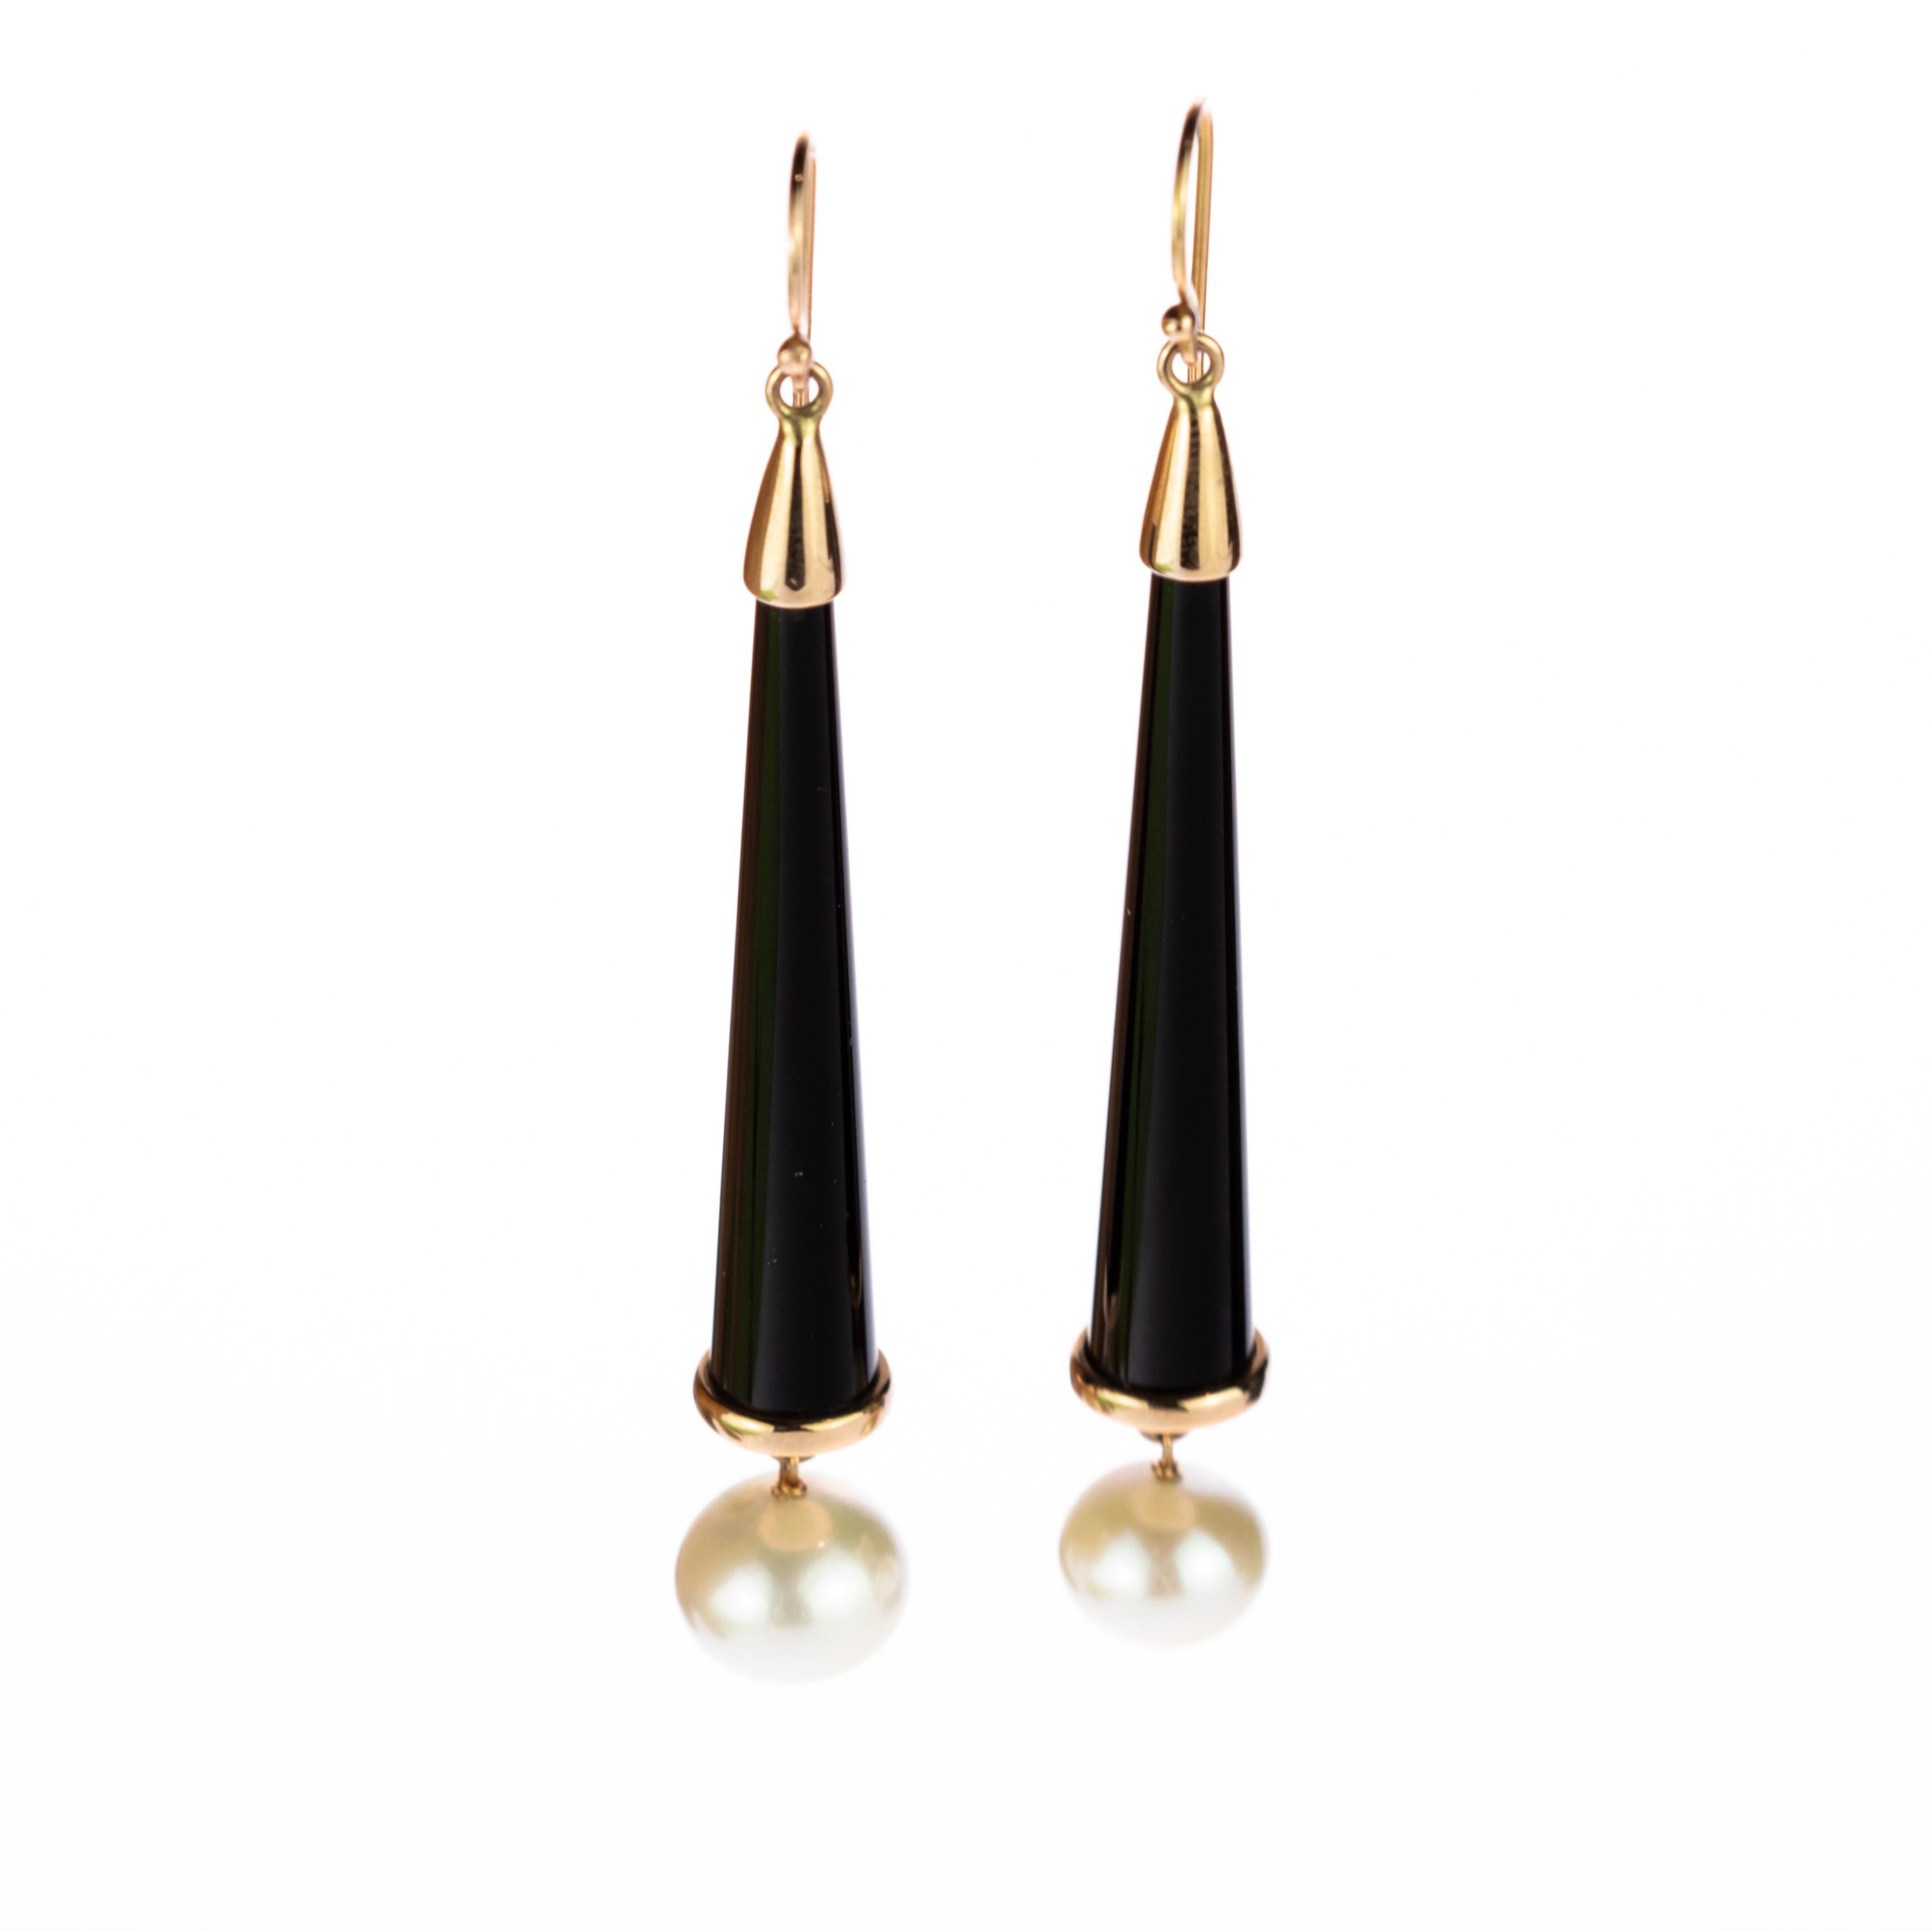 Stunning masterpiece with an outstanding display of color and a high quality craftsmanship that was born in the Intini Jewels workshop. Dangle gold earrings highlighted by 42 carats black onyx drop cones that end in a beautiful and delicate round 24